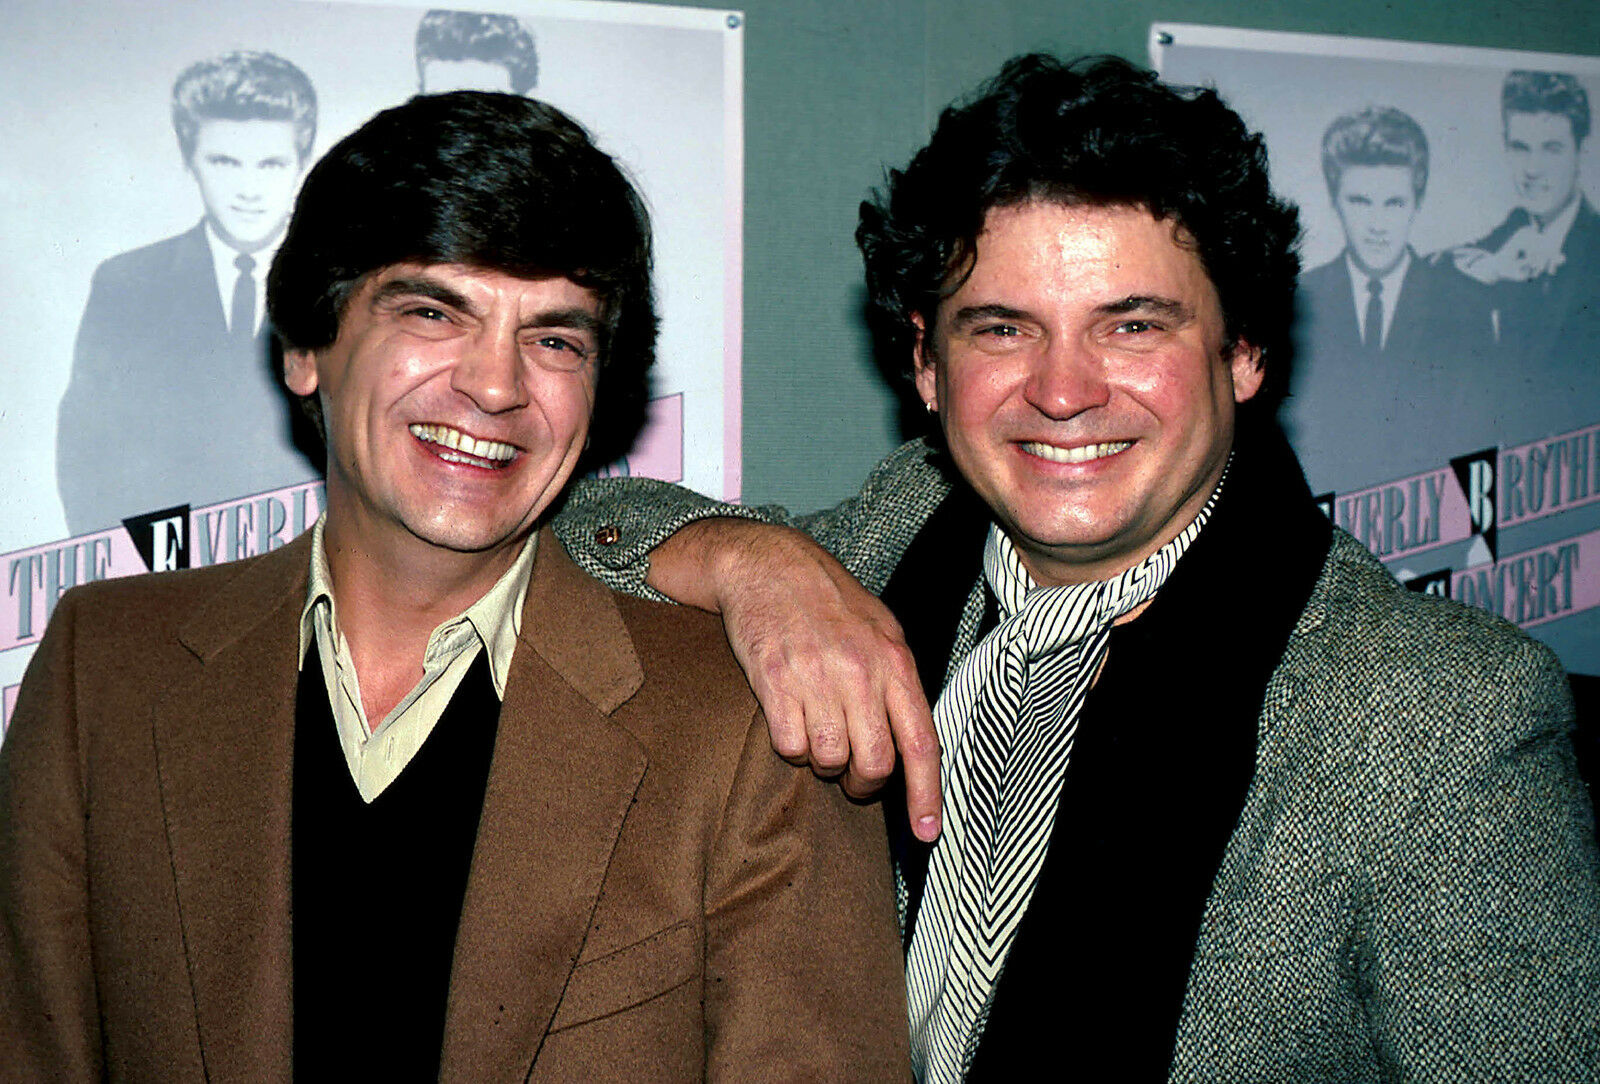 The Everly Brothers - Music Photo #24